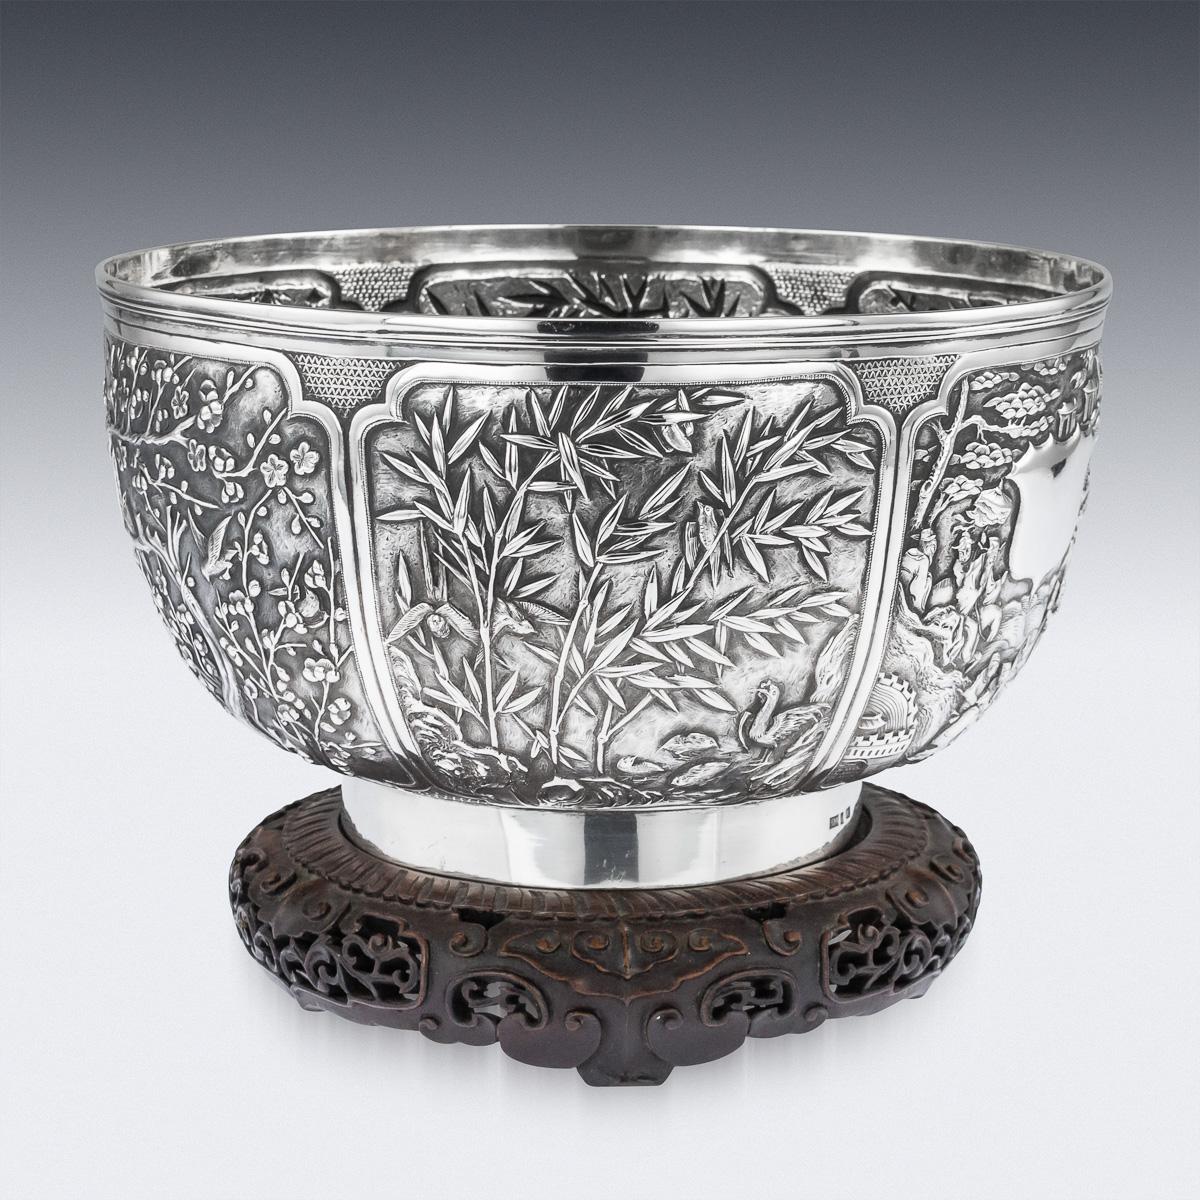 Antique late-19th century Chinese export solid silver fruit bowl on stand, of exceptionally fine quality, intricately chased and embossed depicting a compendium of various designs and themes, two shaped panels depicting densely populated scenes,